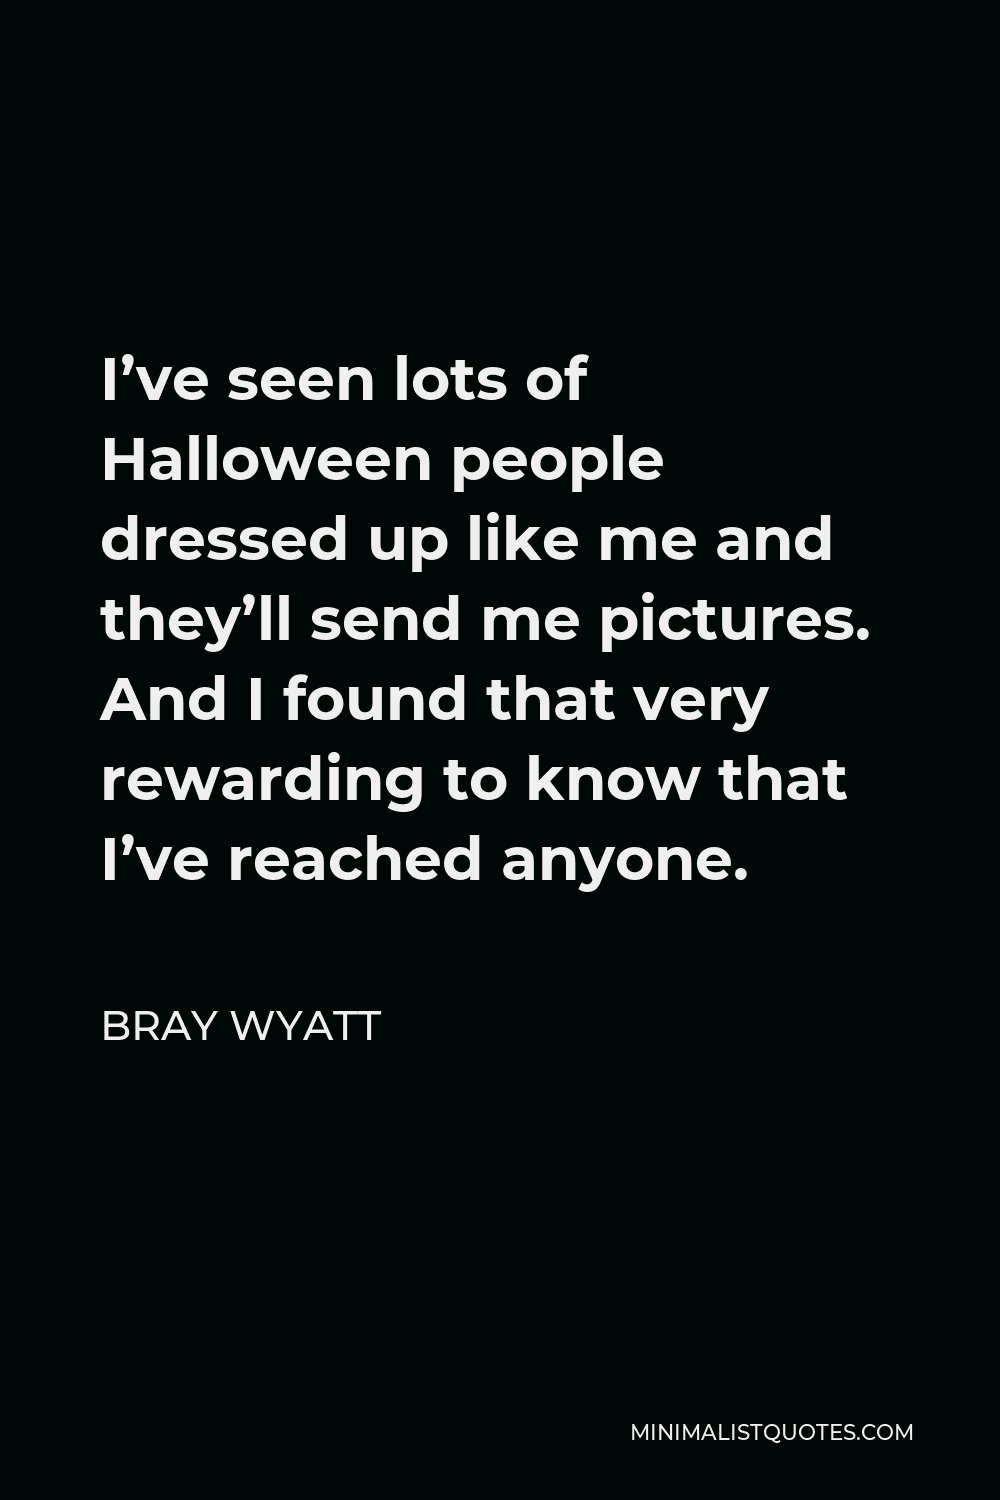 Bray Wyatt Quote - I’ve seen lots of Halloween people dressed up like me and they’ll send me pictures. And I found that very rewarding to know that I’ve reached anyone.